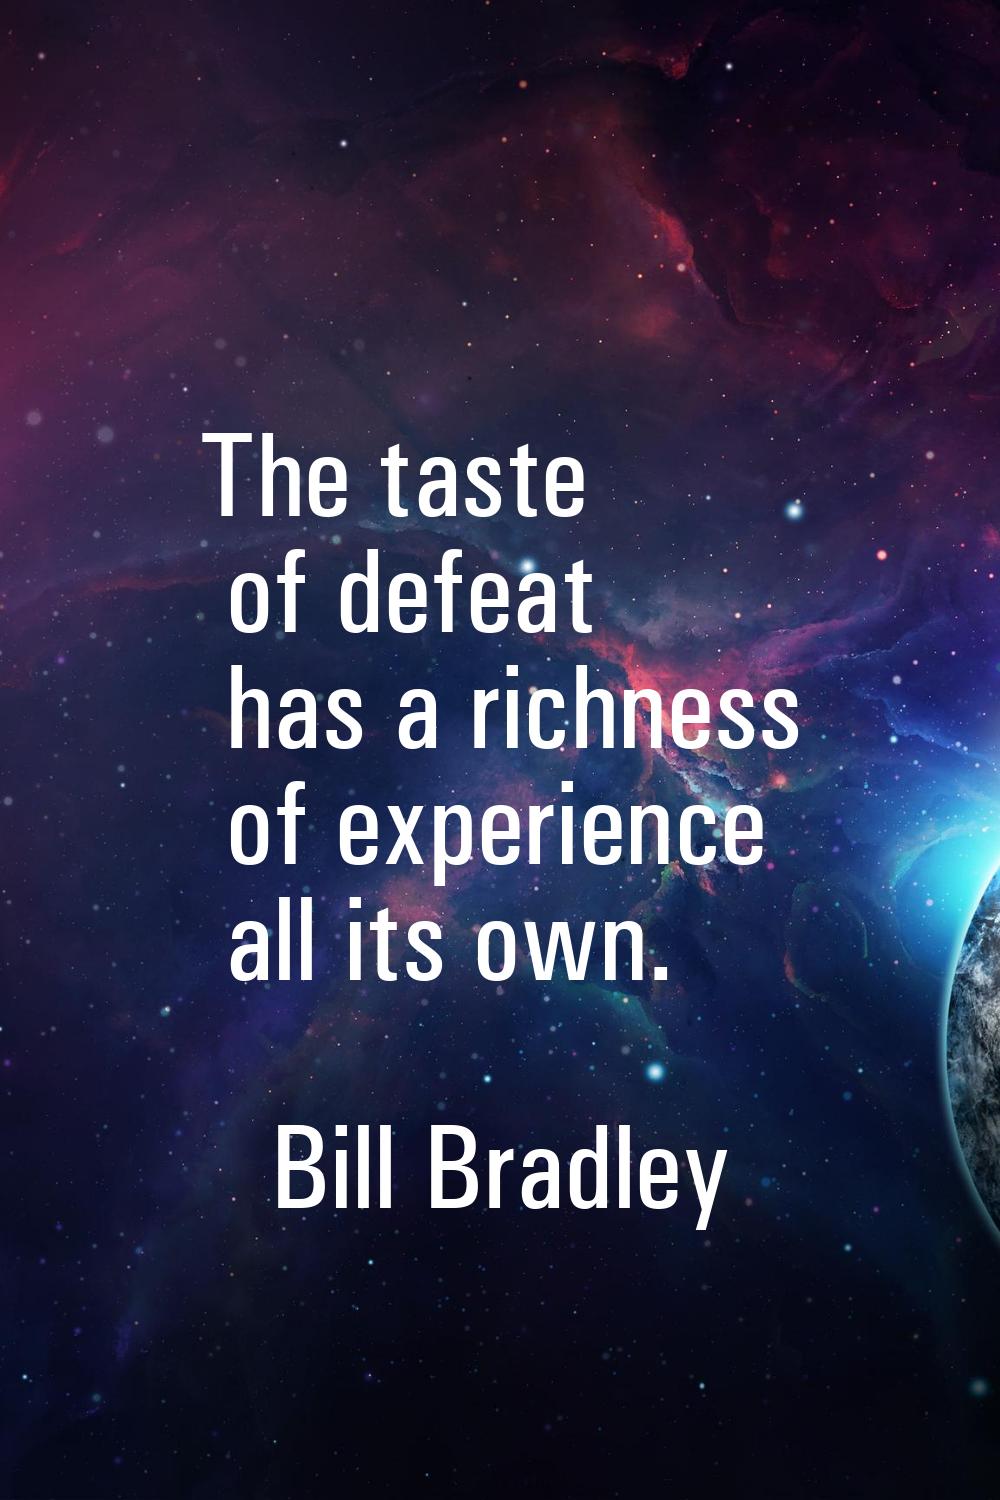 The taste of defeat has a richness of experience all its own.